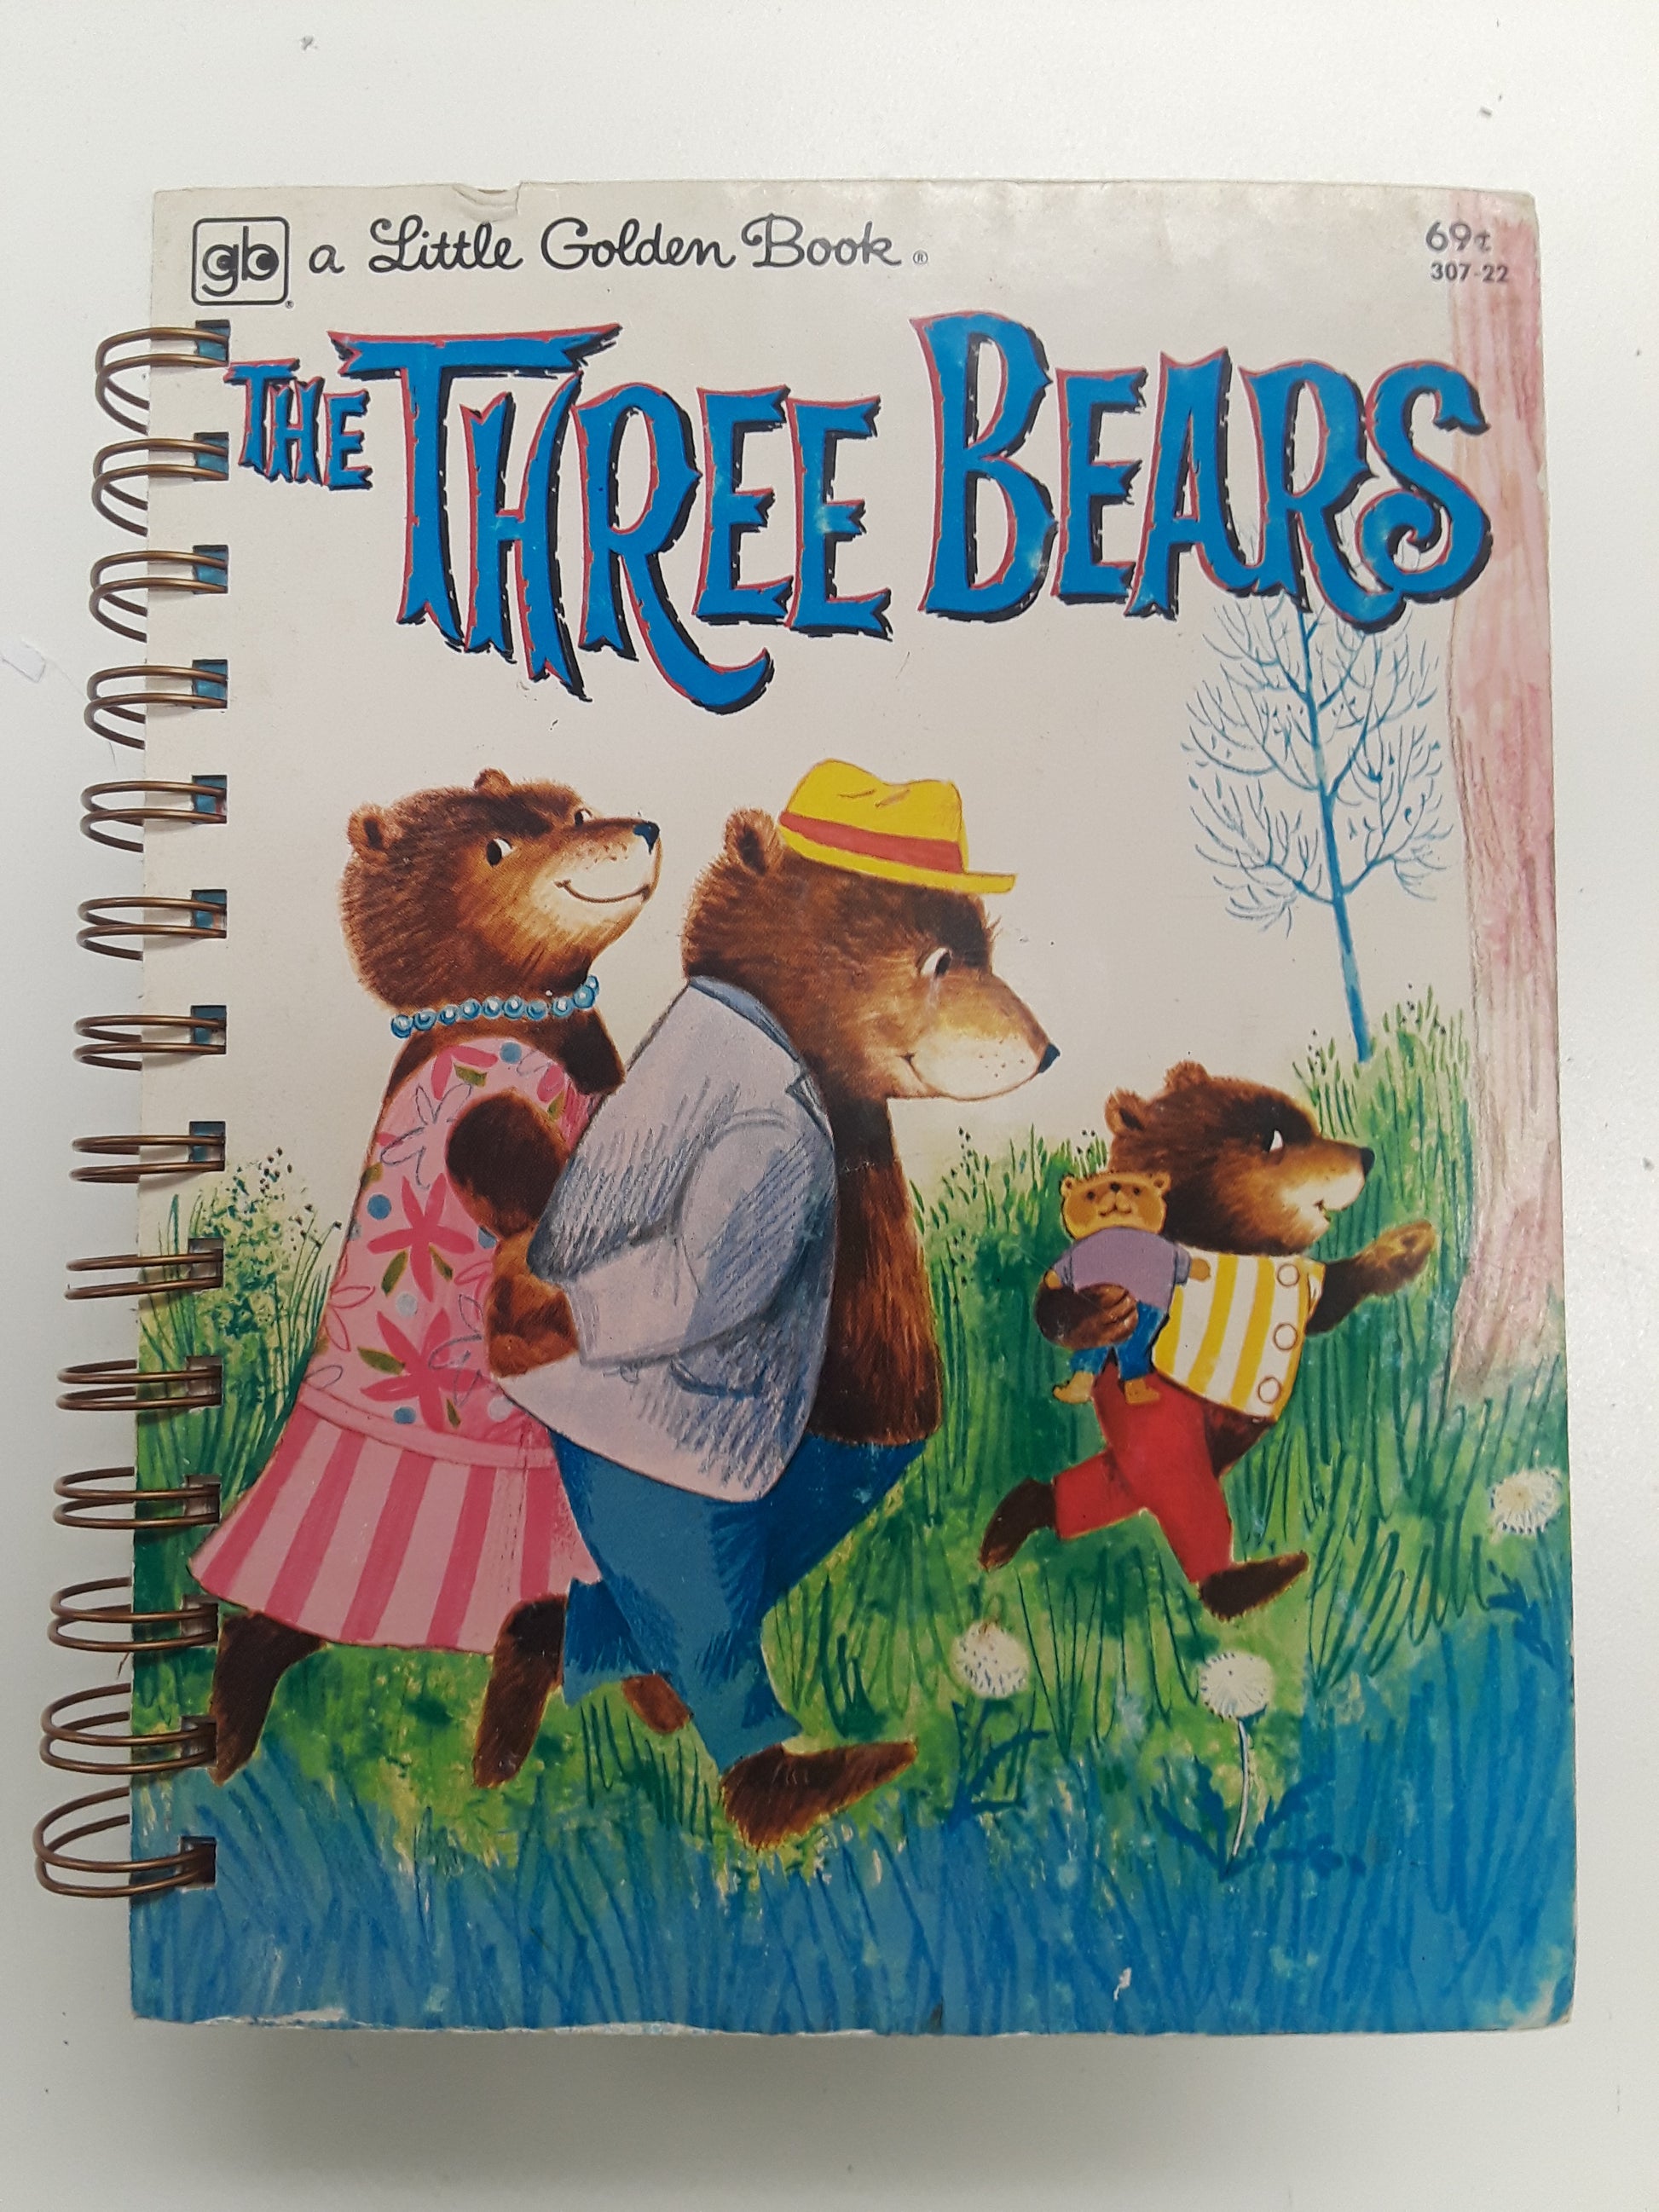 The Three Bears-Red Barn Collections